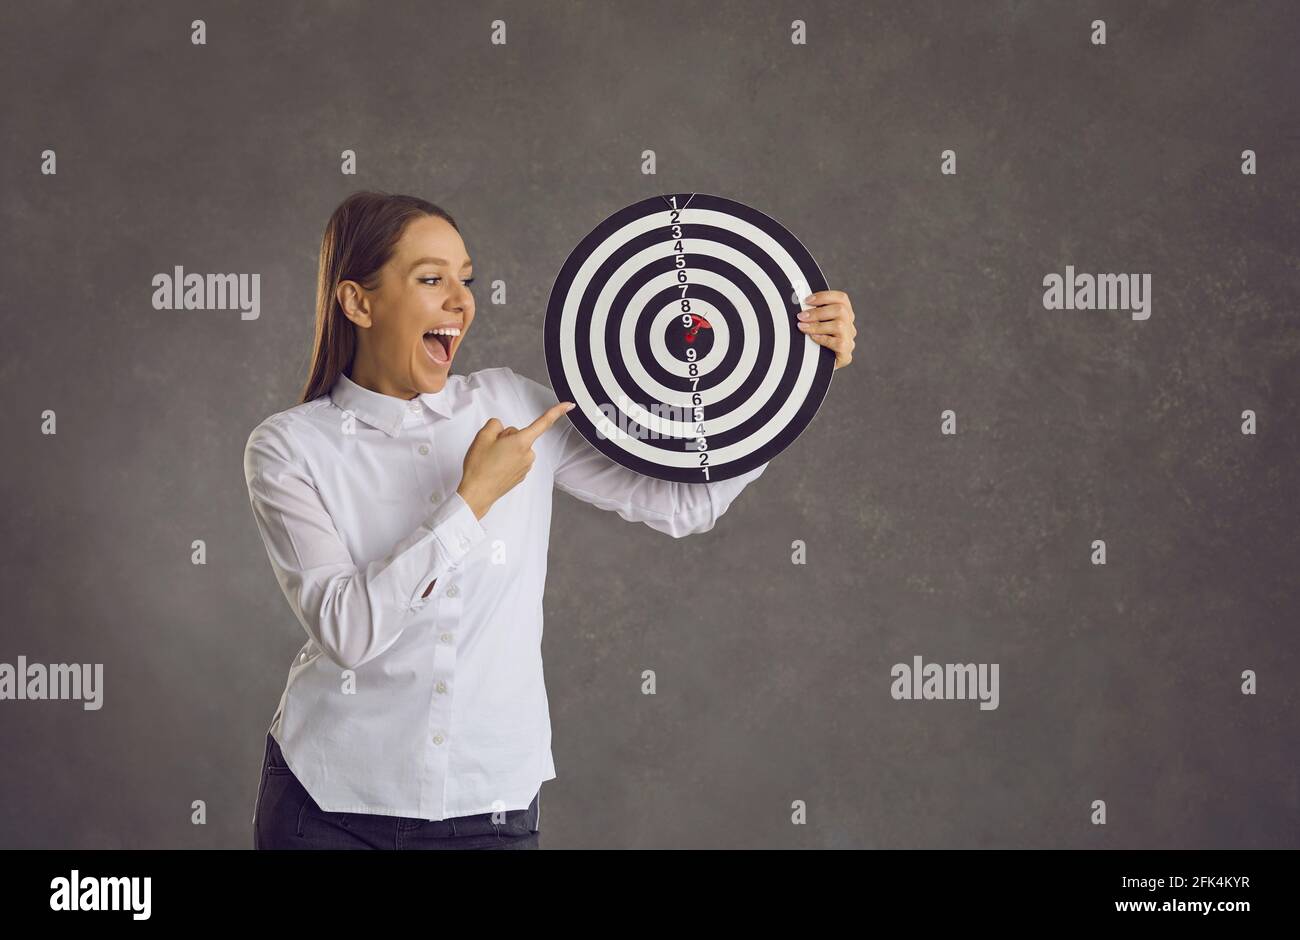 Happy young businesswoman holding dartboard target with red dart right in bullseye Stock Photo